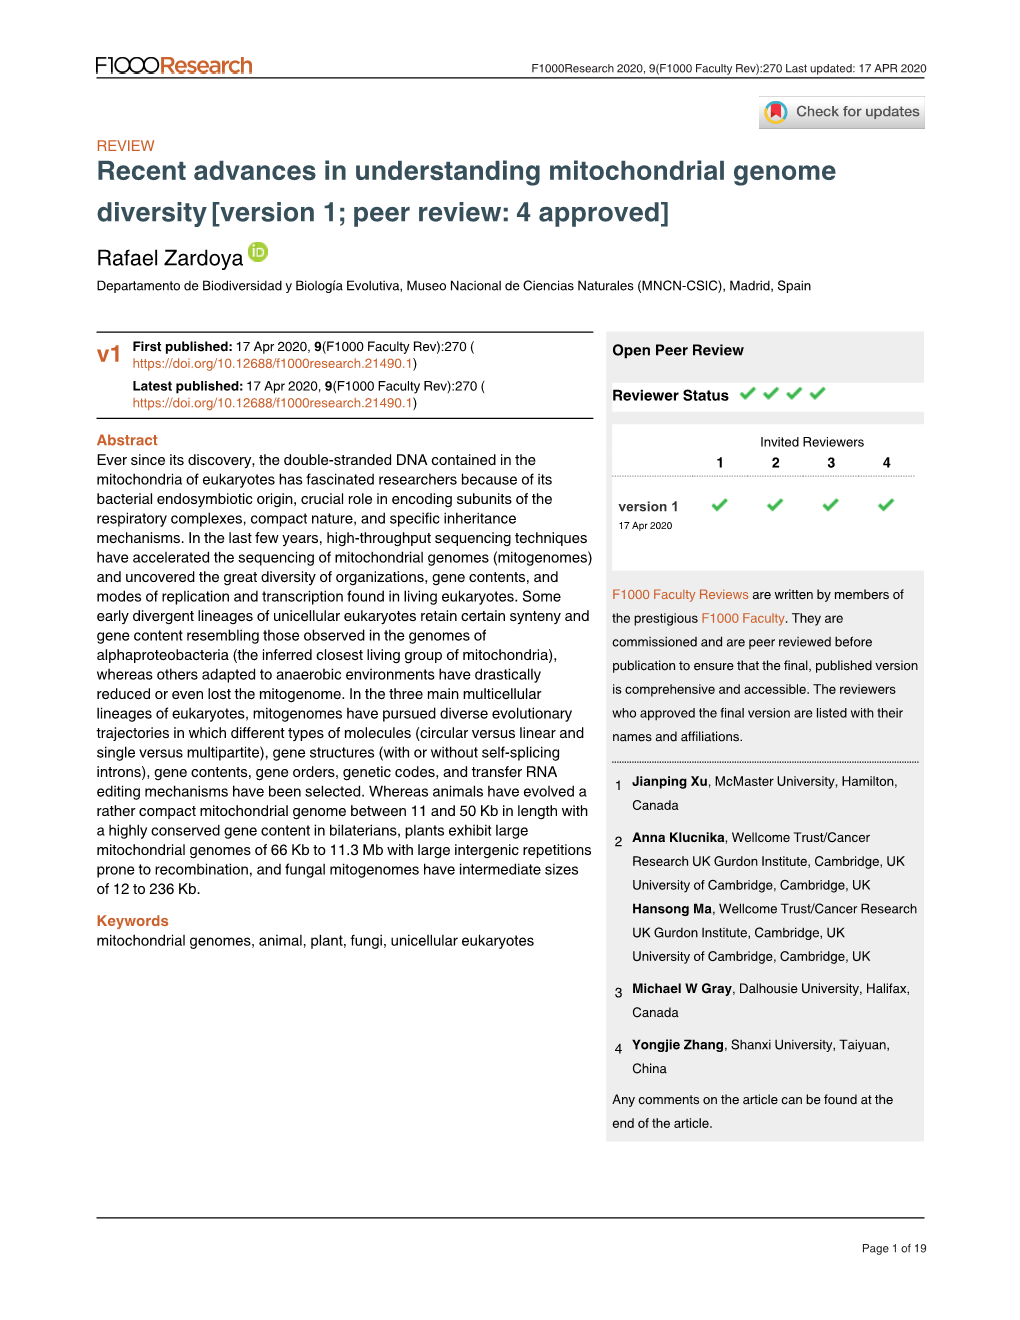 Recent Advances in Understanding Mitochondrial Genome Diversity[Version 1; Peer Review: 4 Approved]